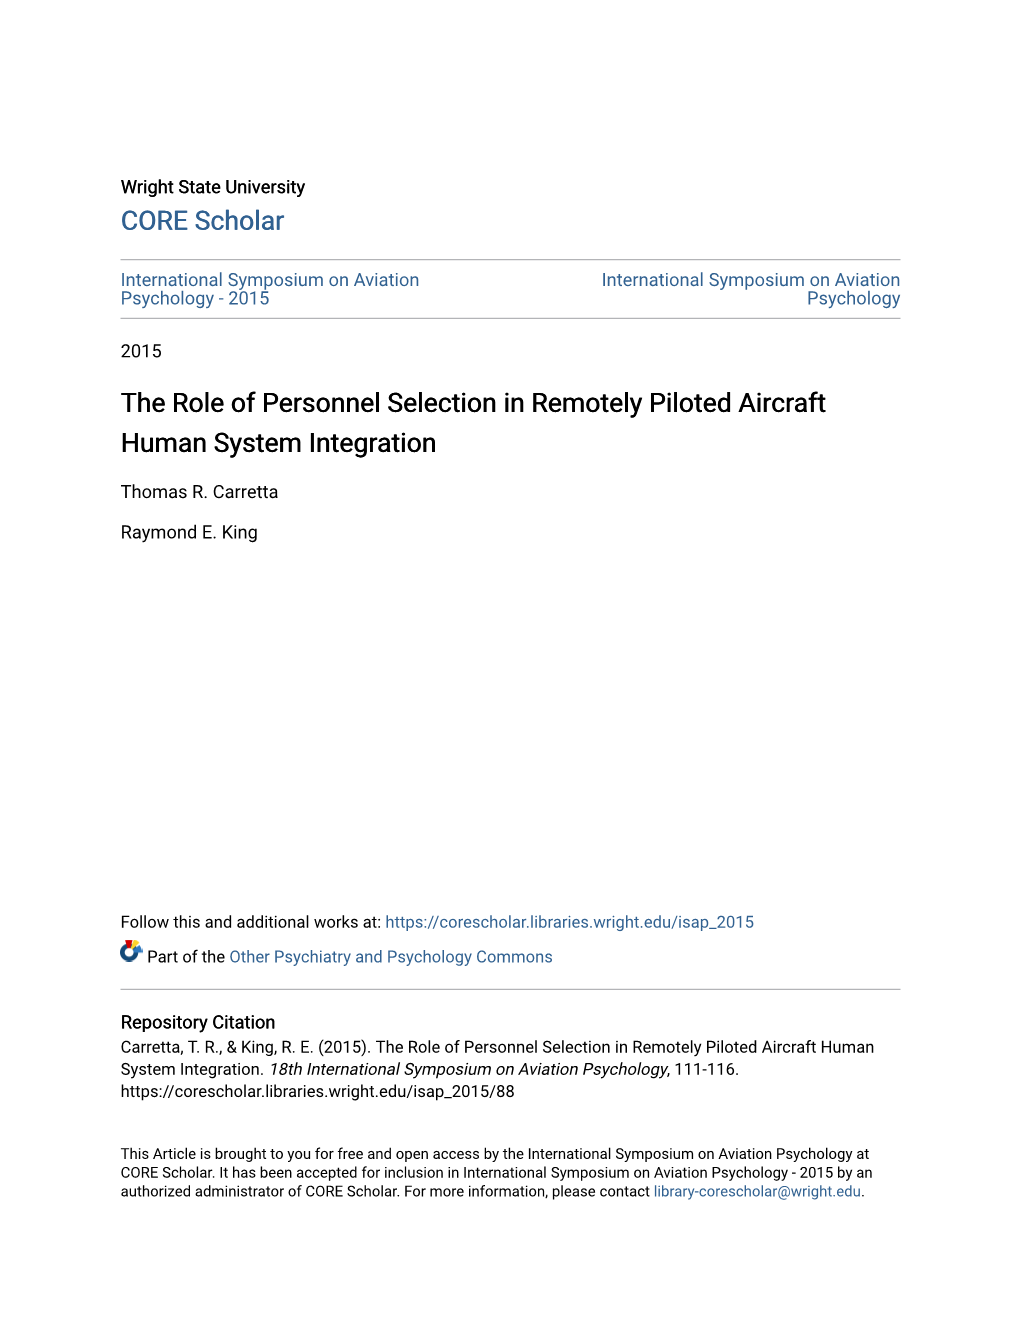 The Role of Personnel Selection in Remotely Piloted Aircraft Human System Integration